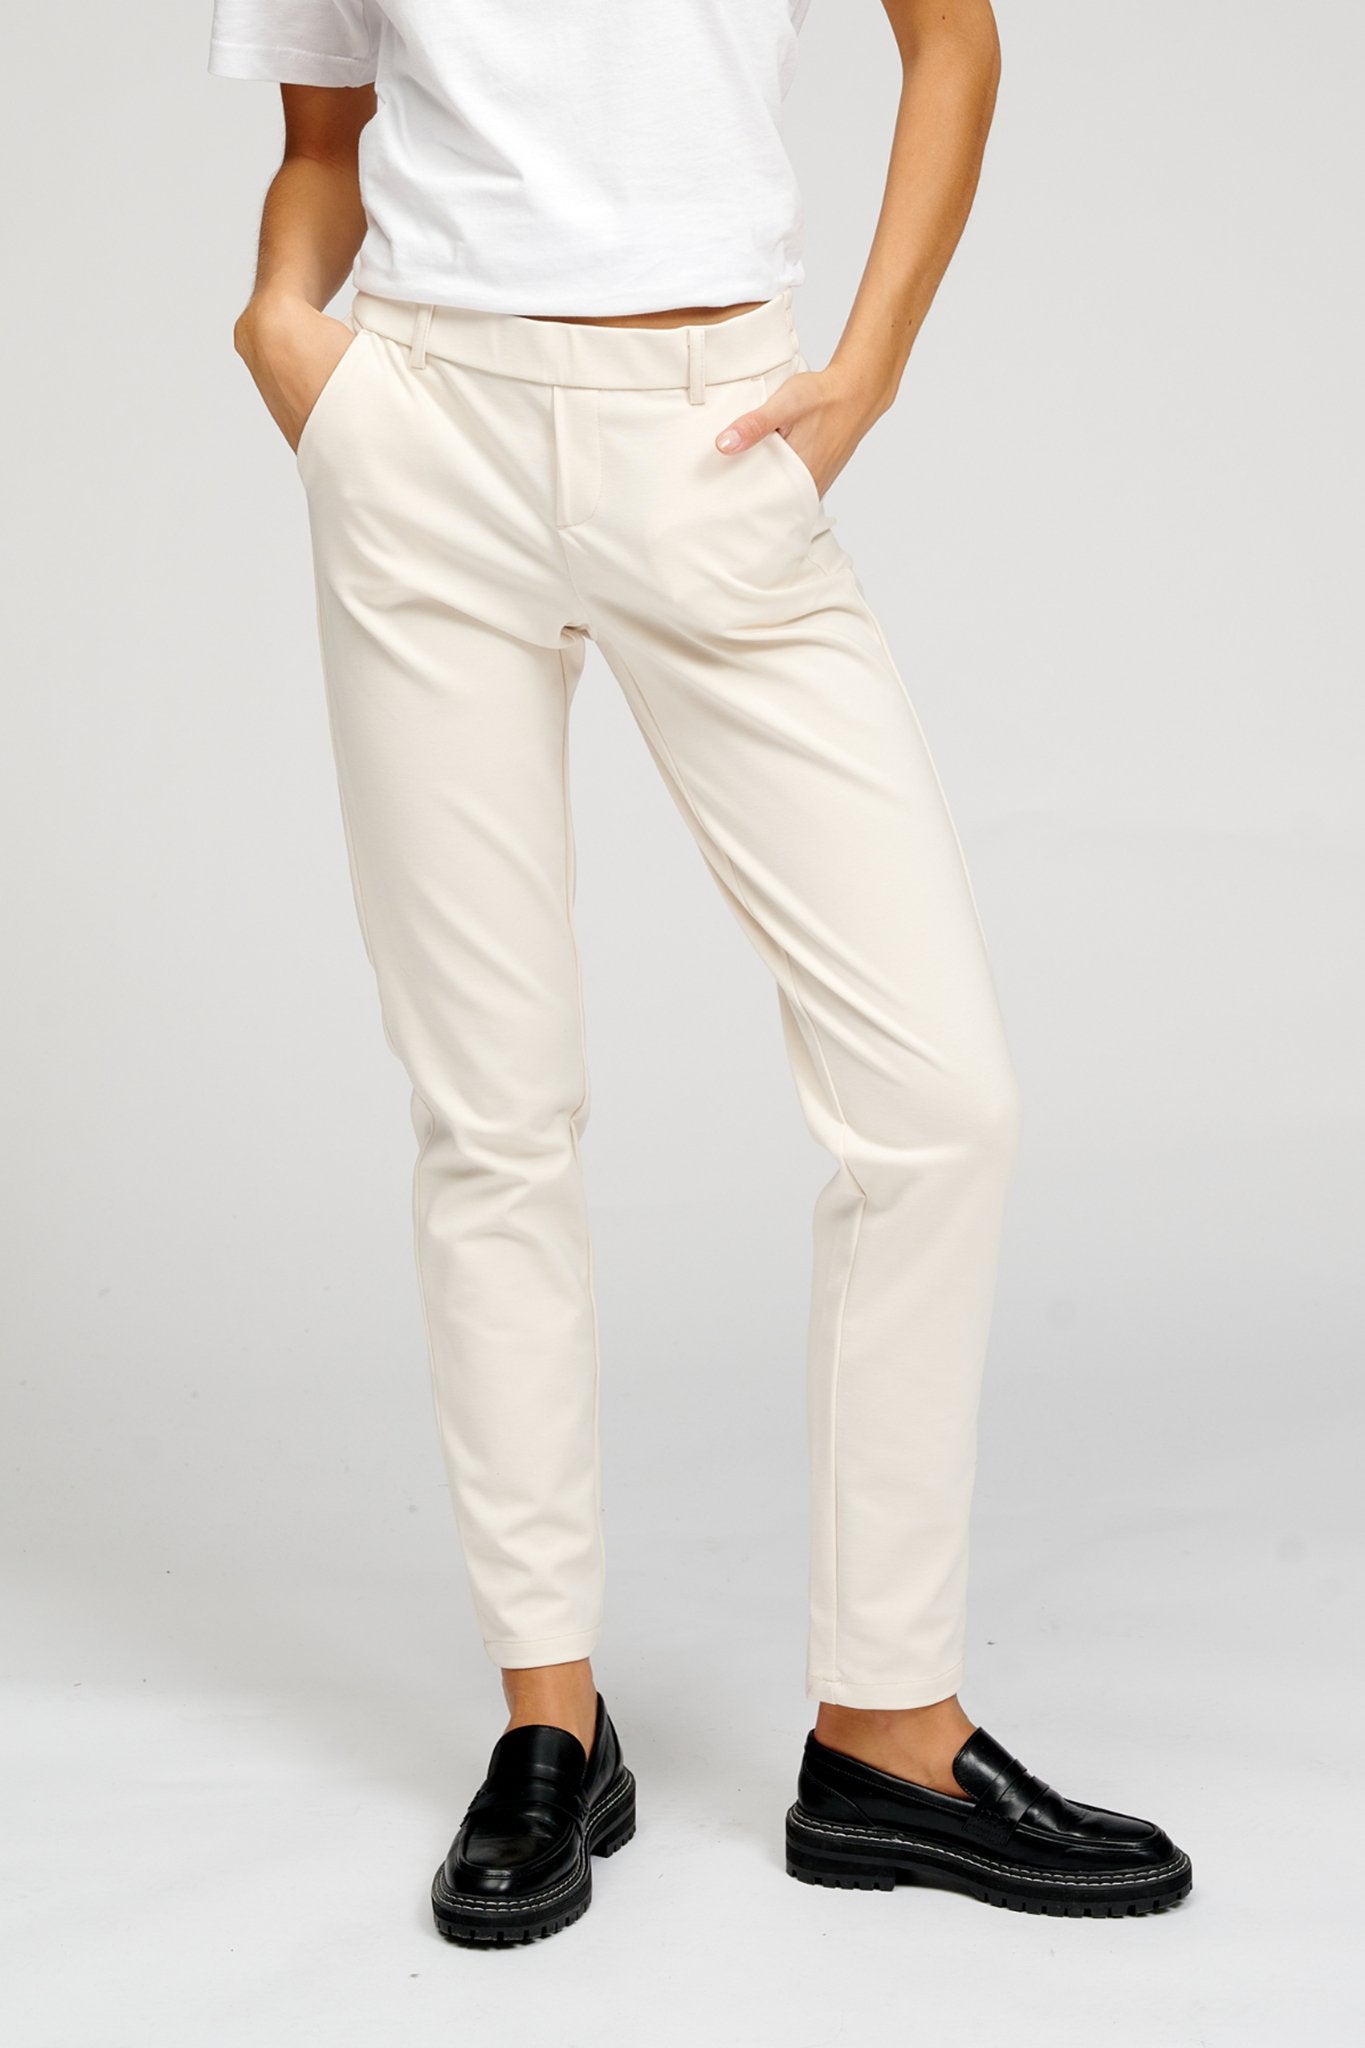 High-waisted pants for work